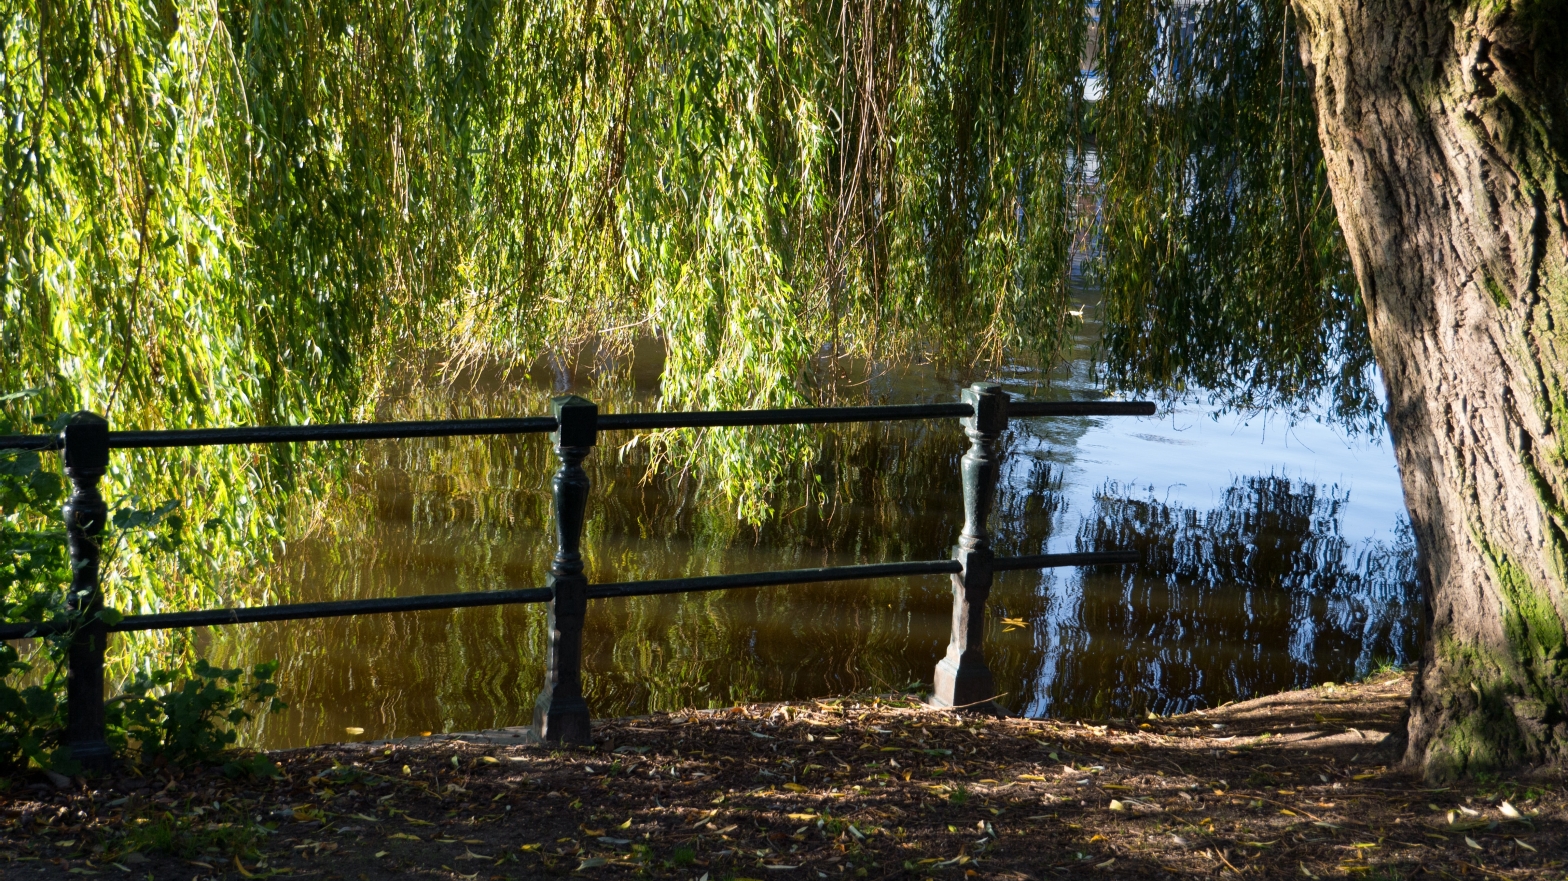 Image shows a willow tree overhanging a lake or river